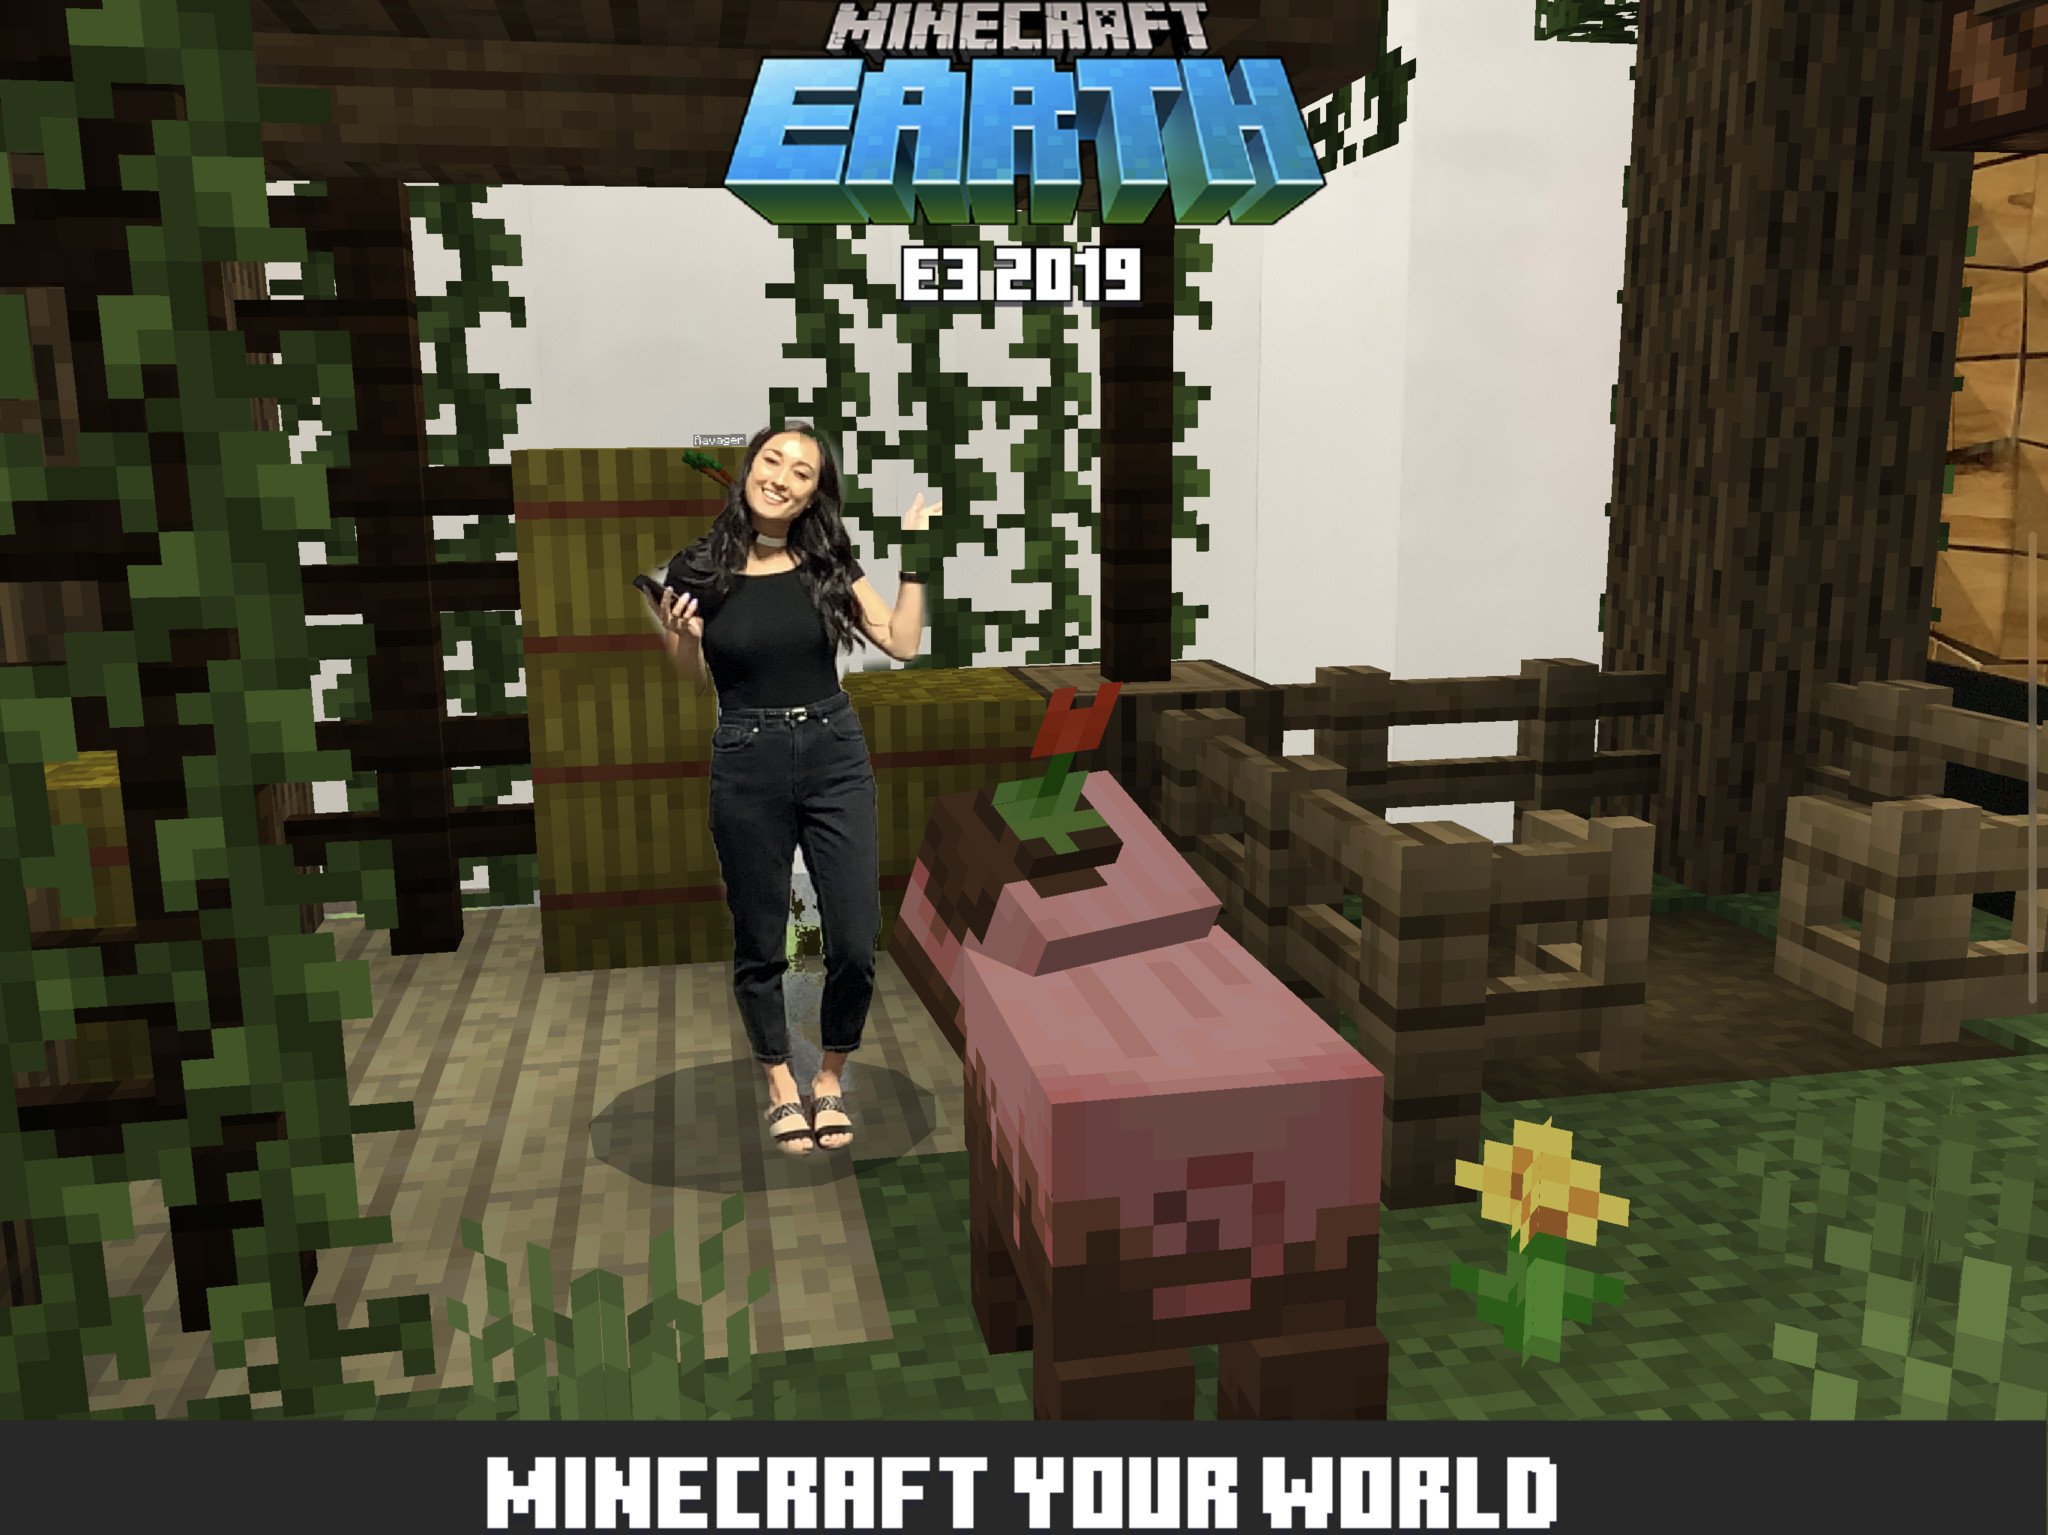 New Game: Minecraft Earth